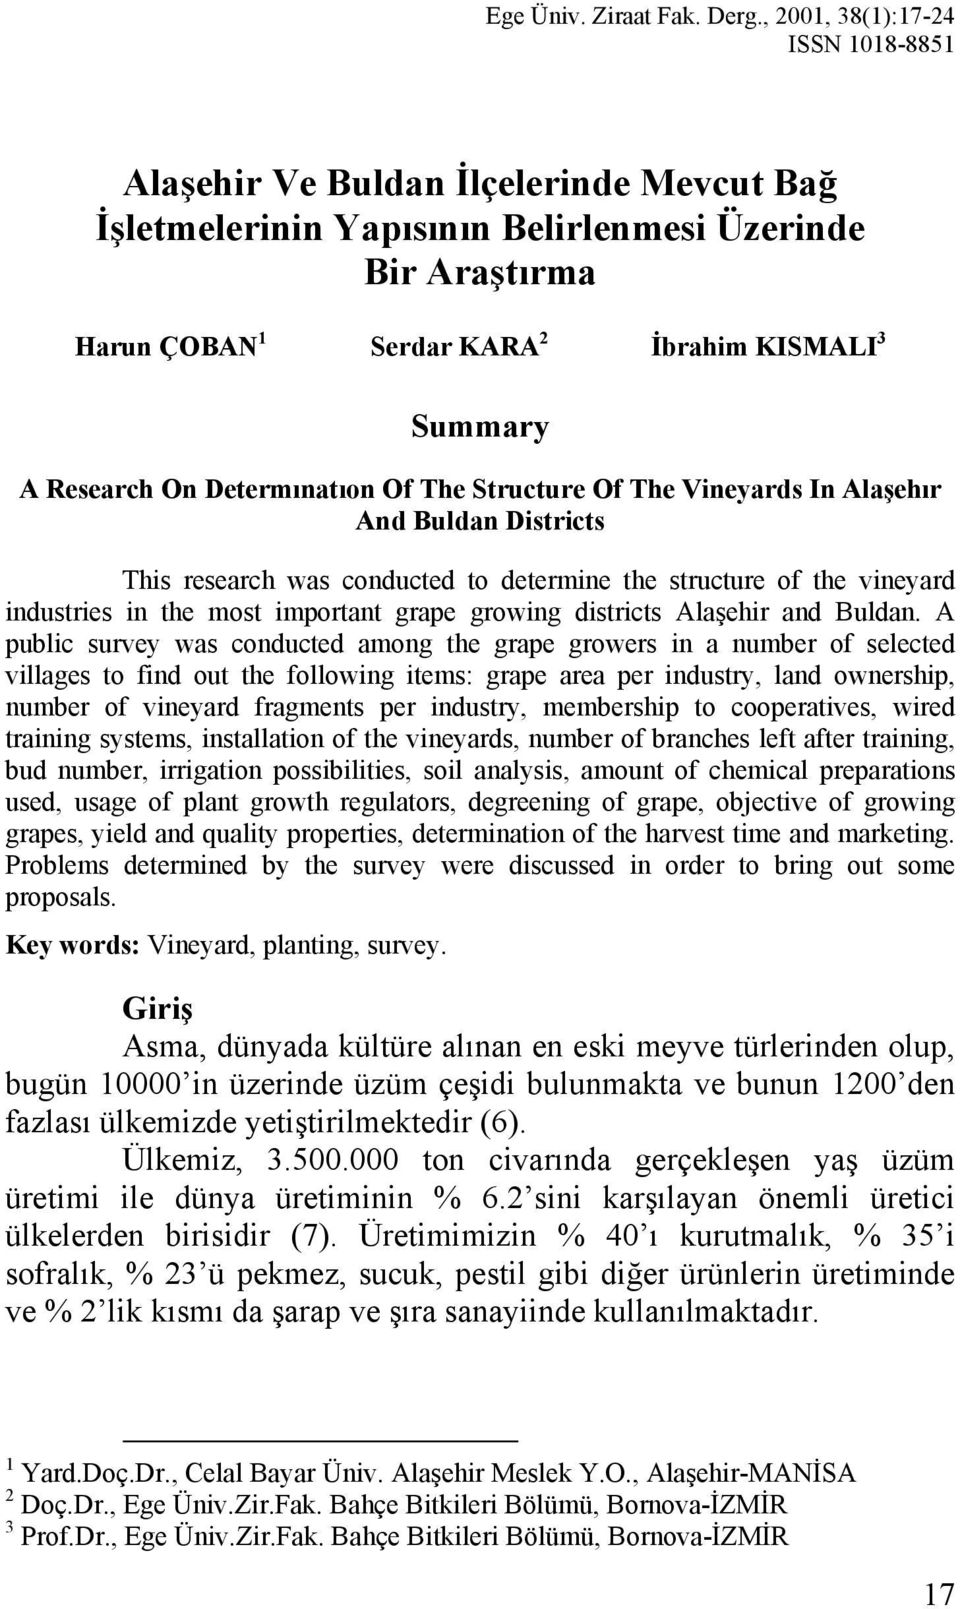 Research On Determınatıon Of The Structure Of The Vineyards In Alaşehır And Buldan Districts This research was conducted to determine the structure of the vineyard industries in the most important